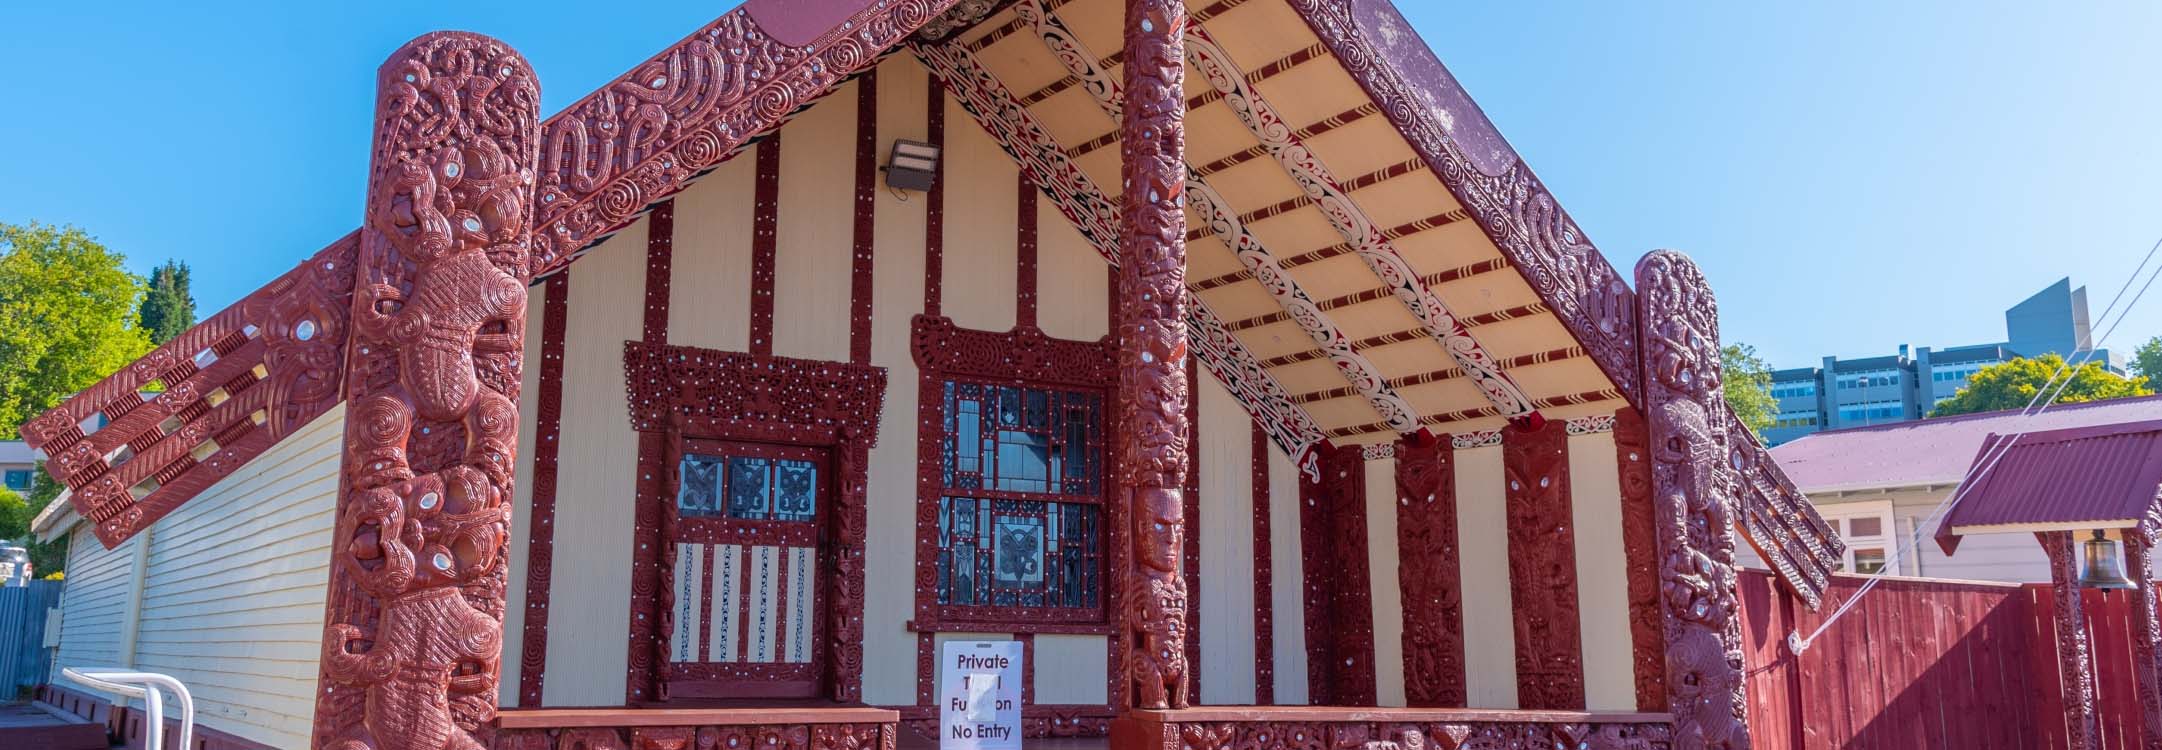 A wharae, part of a marae in front of some trees and blue sky.